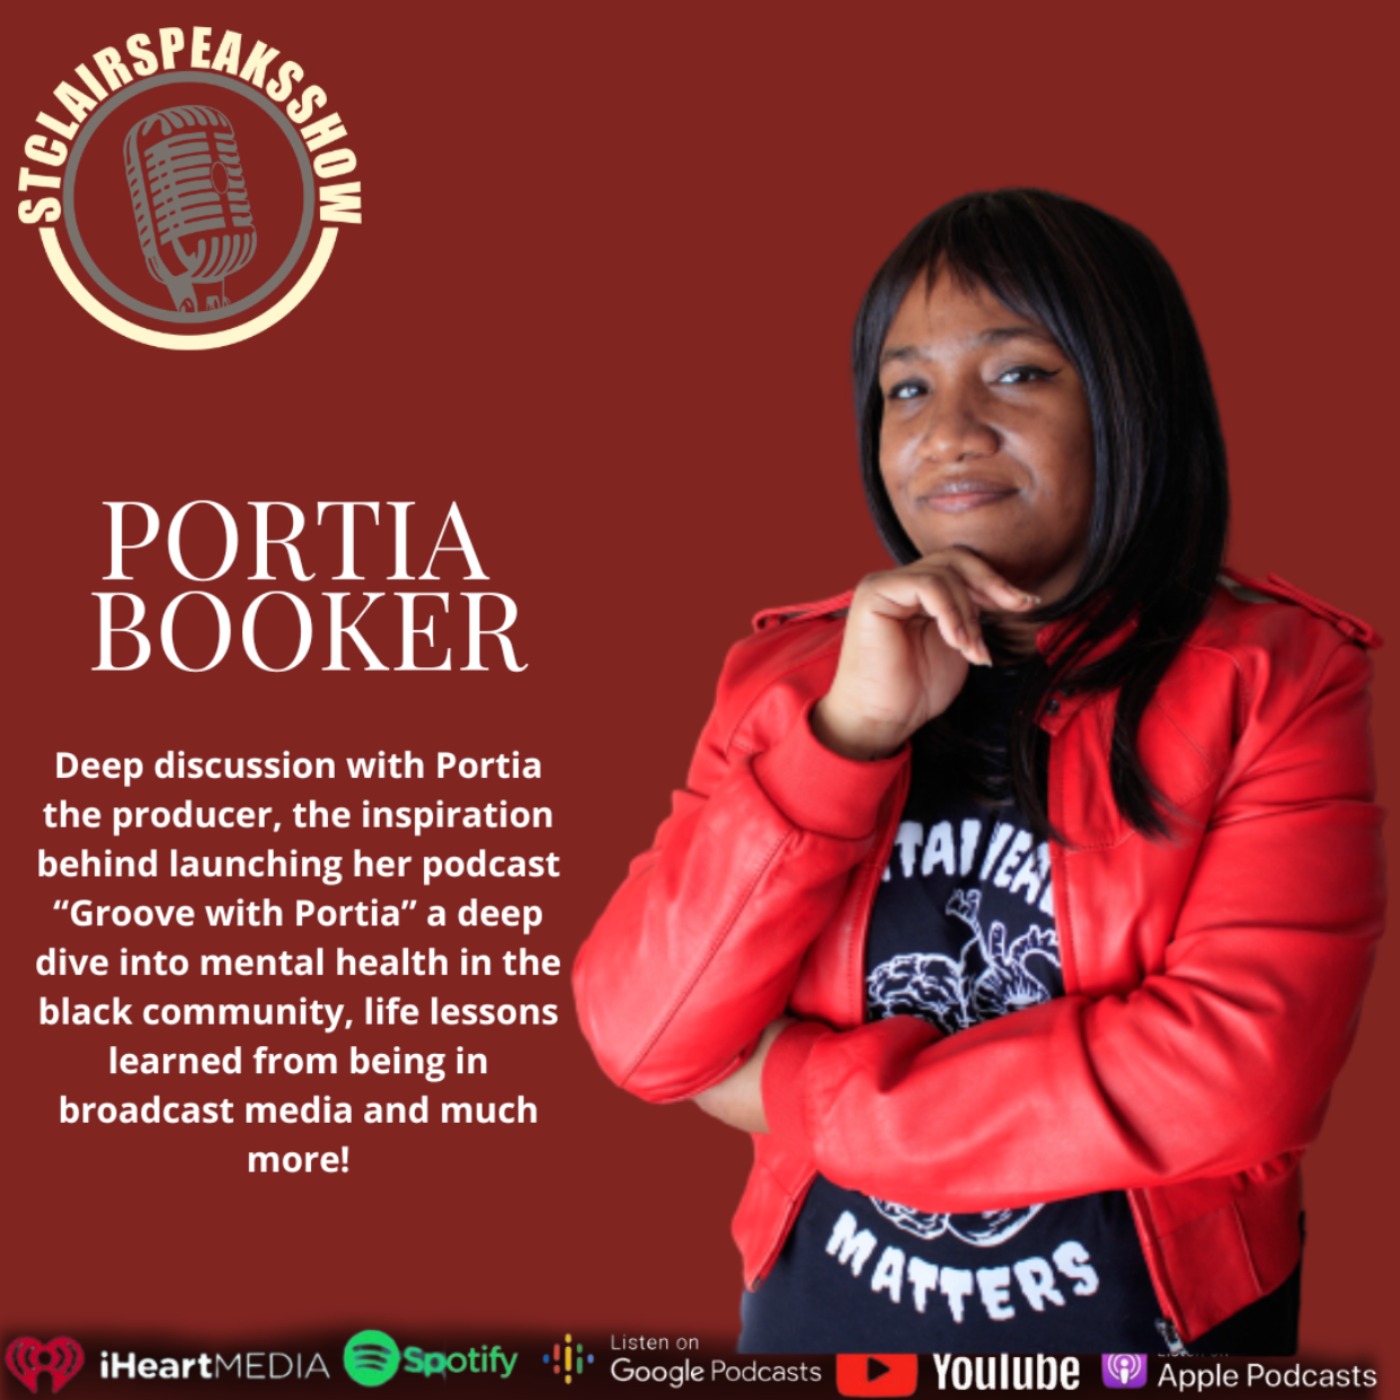 The StclairspeakShow featuring Portia Booker Image